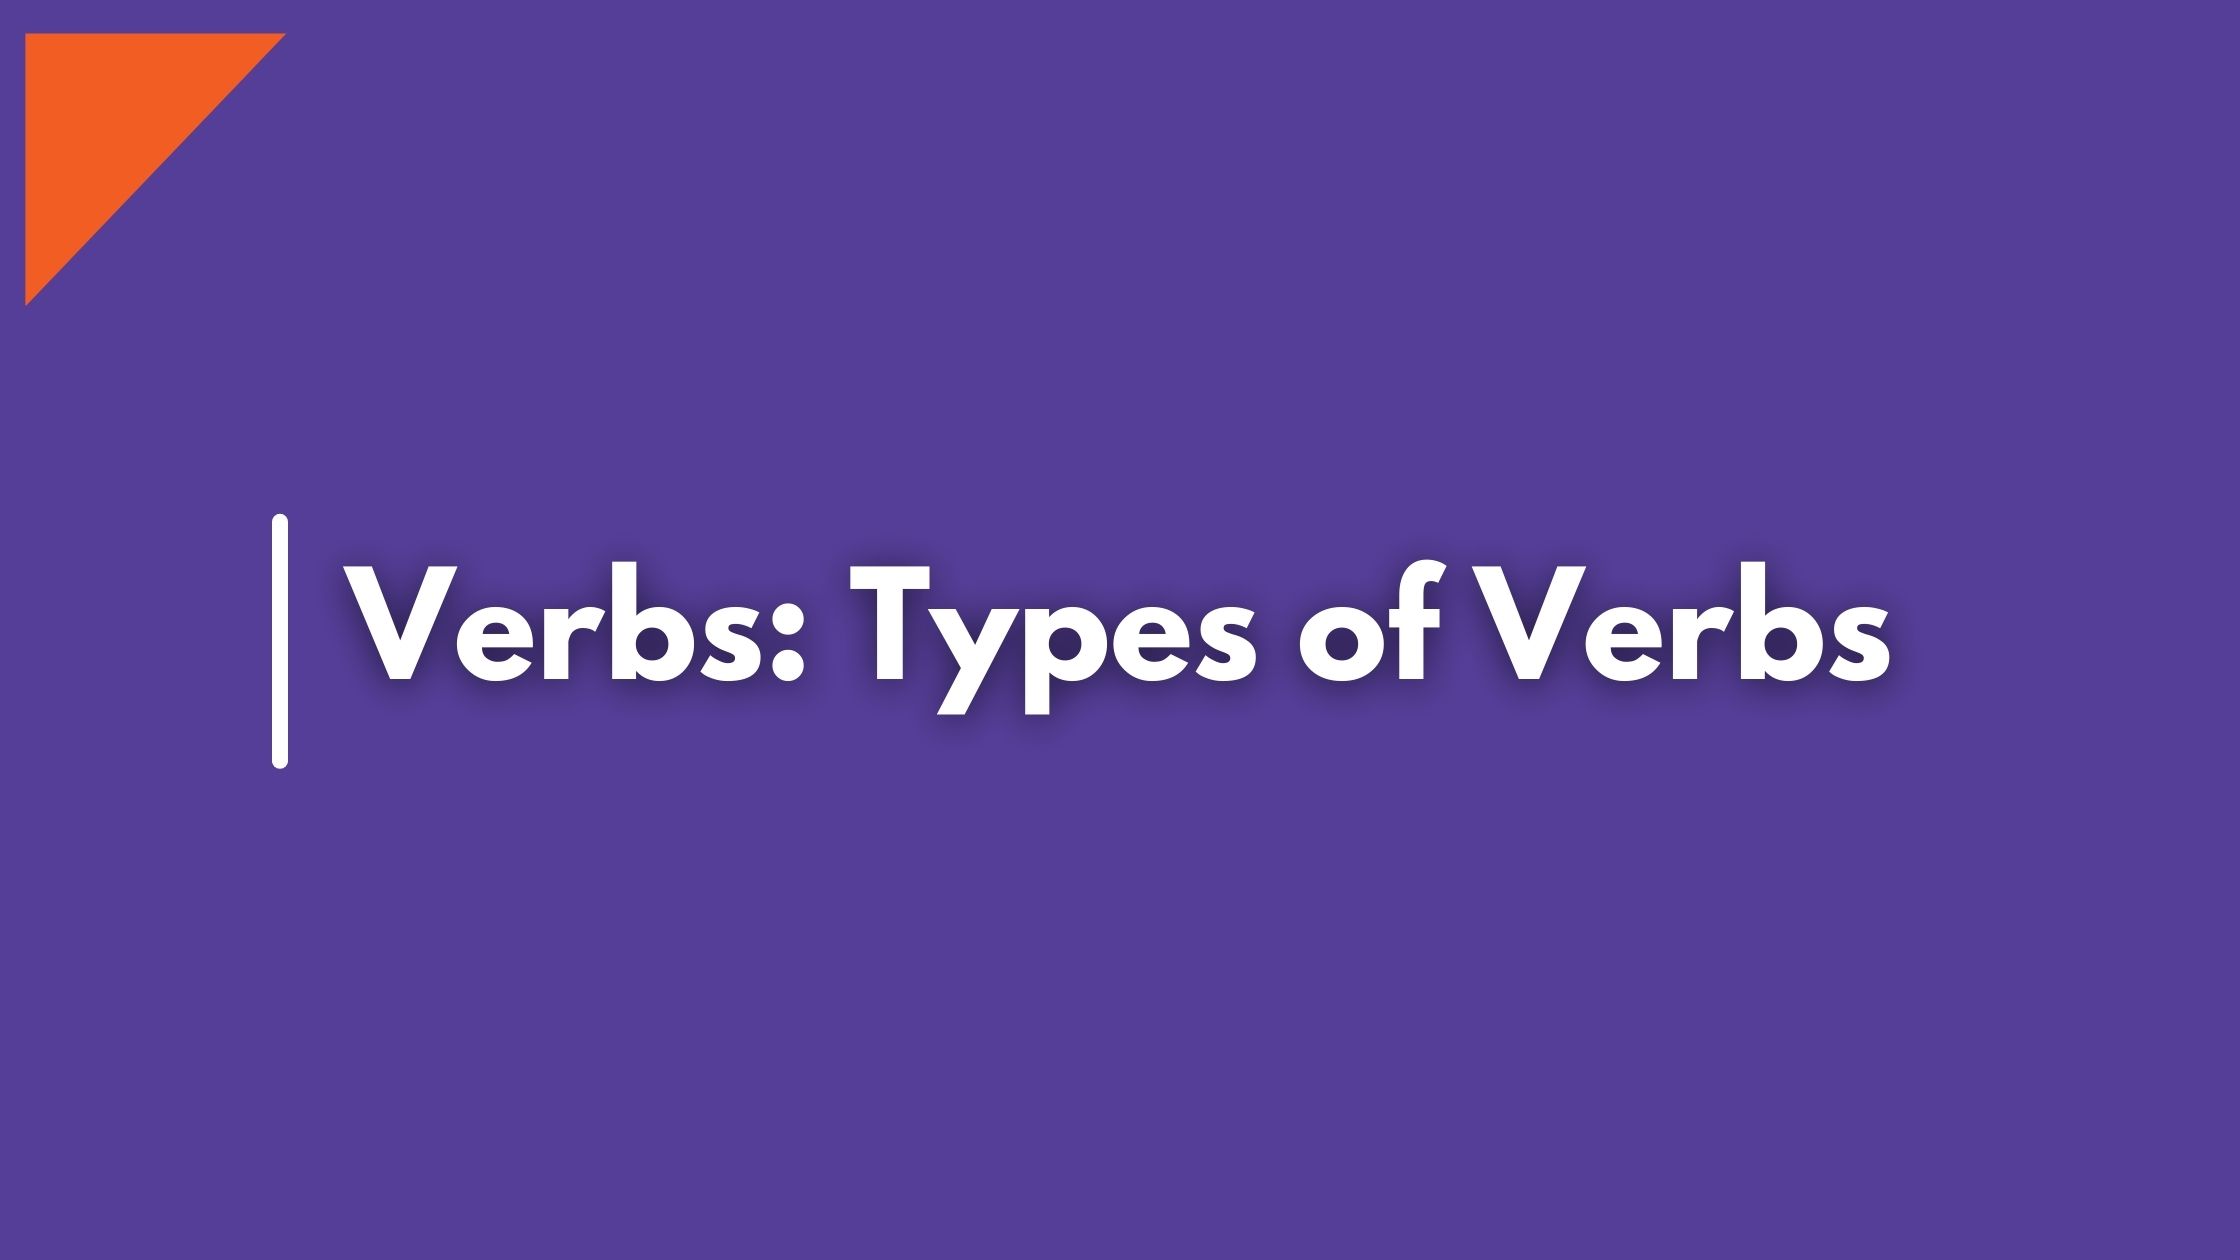 What are the seven rules for forming verbs?